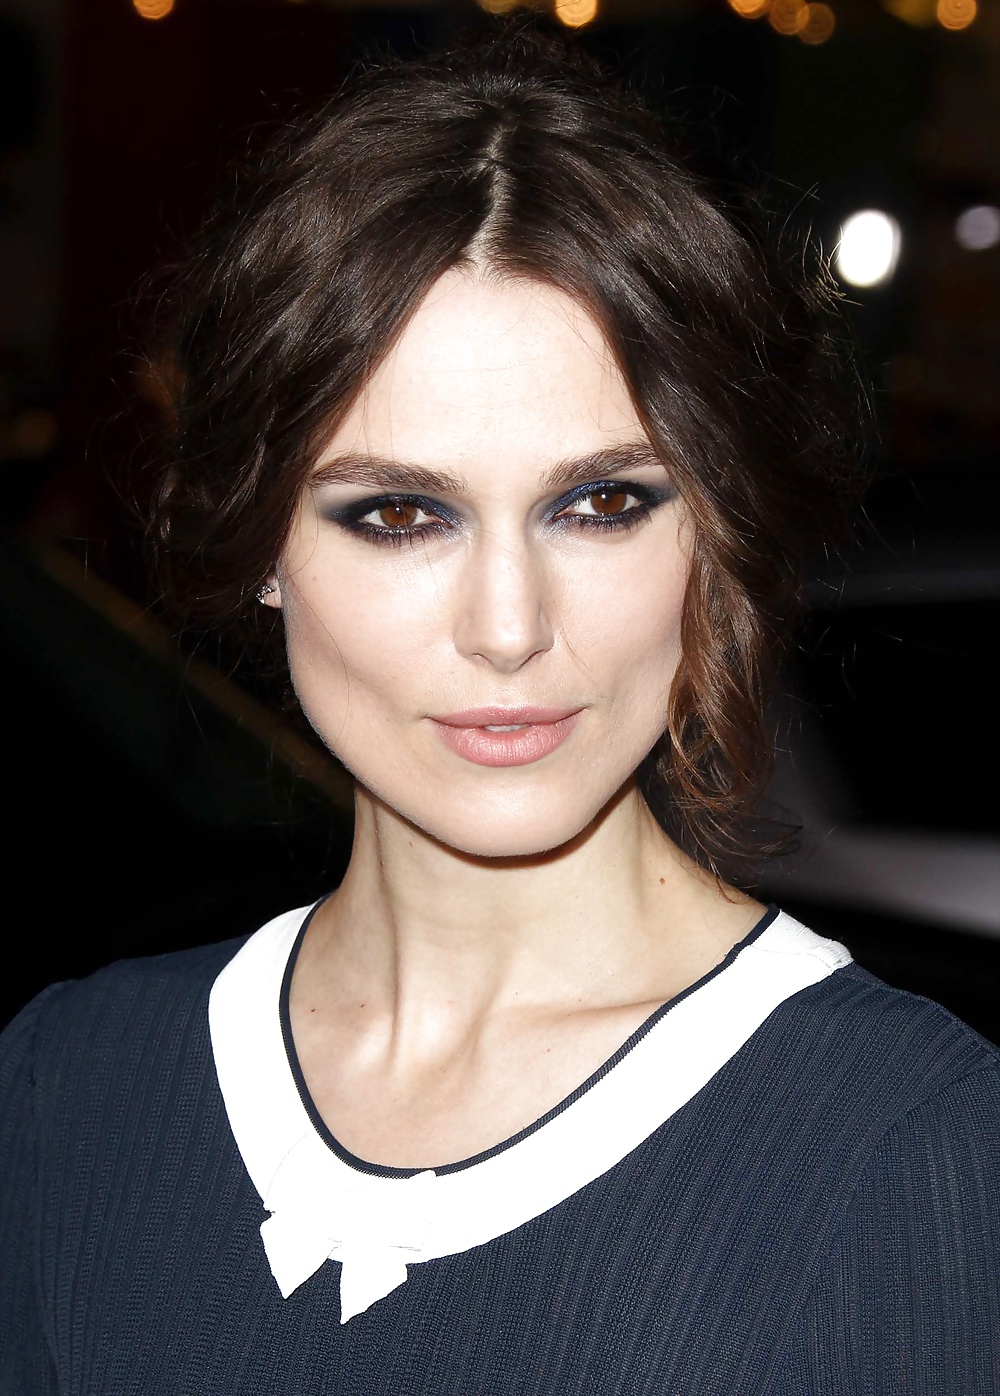 Keira Knightley The Royal Lady of England #35649542